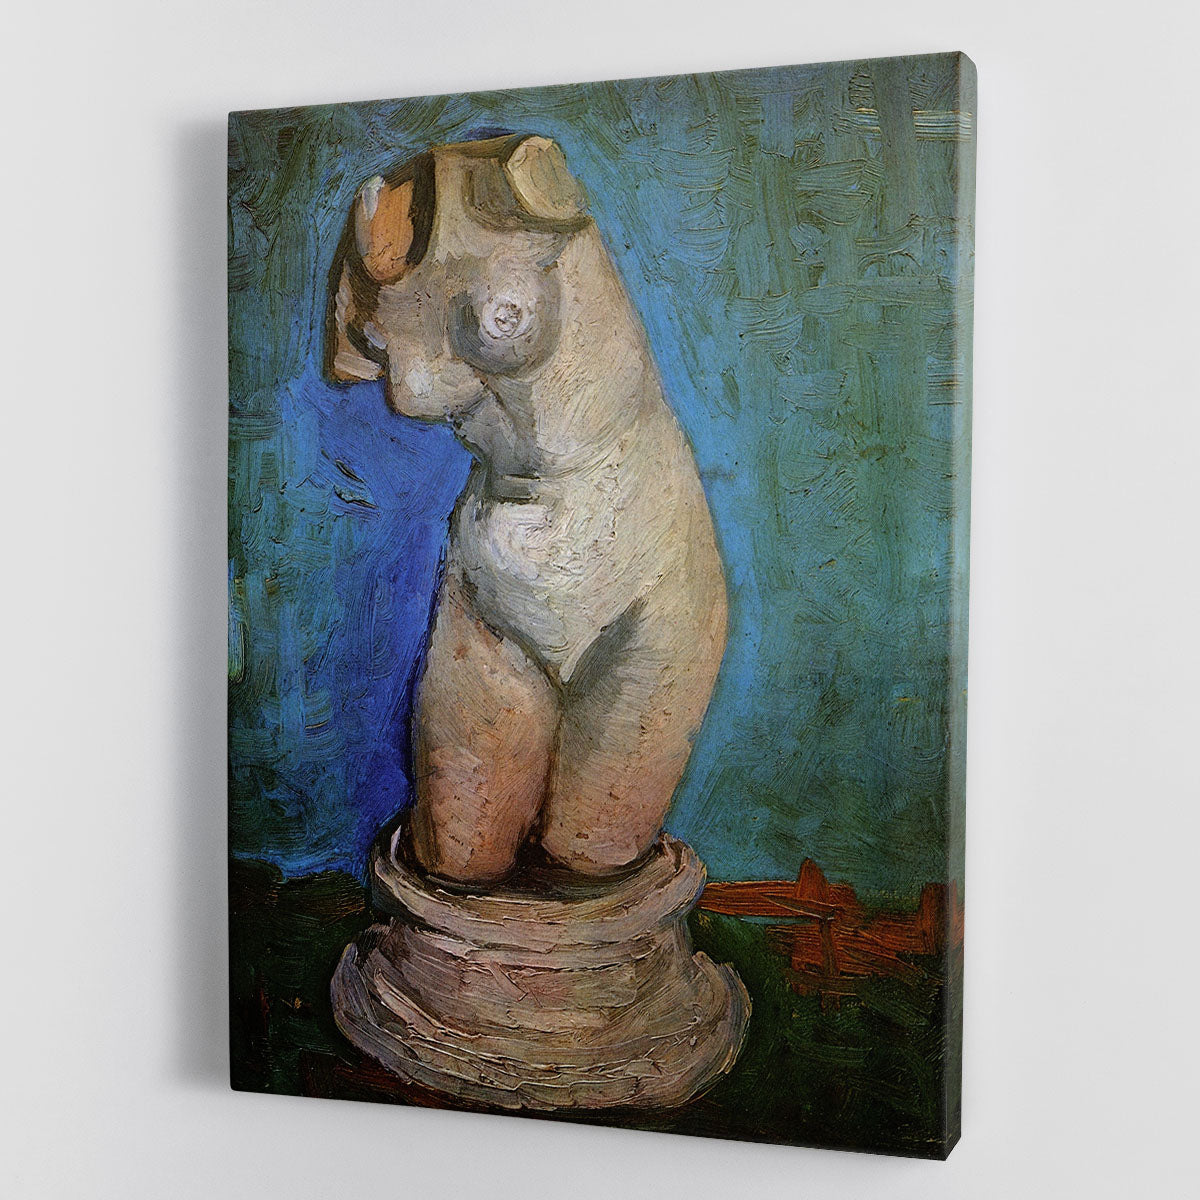 Plaster Statuette of a Female Torso 2 by Van Gogh Canvas Print or Poster - Canvas Art Rocks - 1